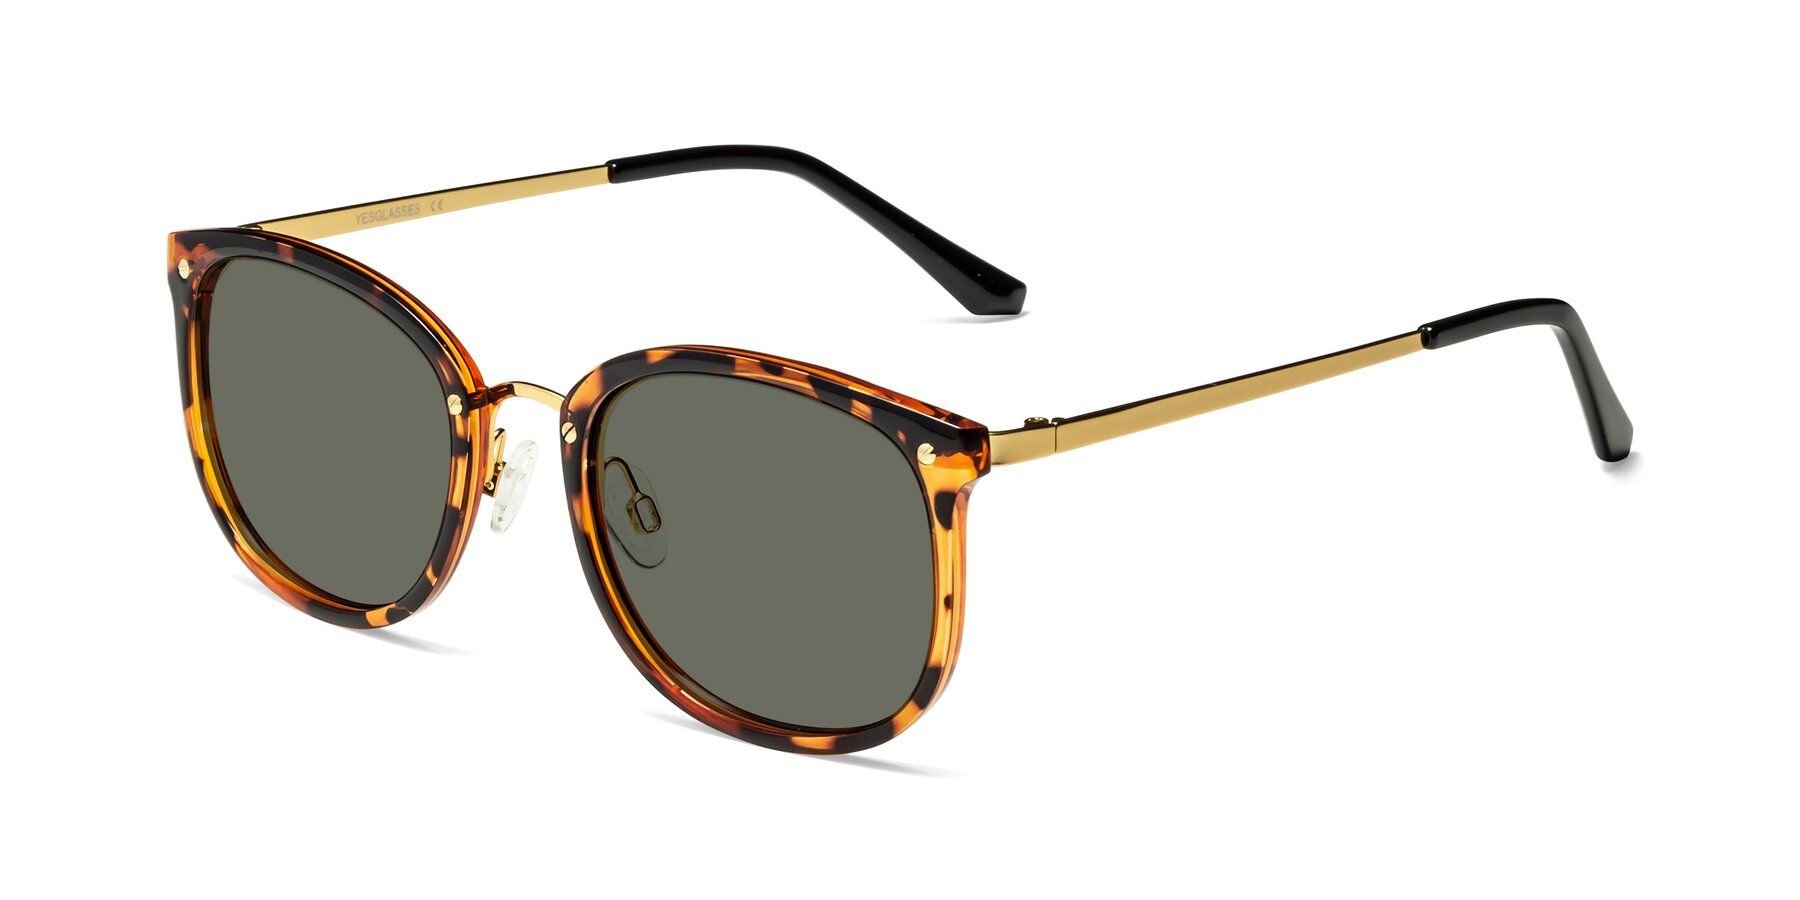 Angle of Timeless in Tortoise-Golden with Gray Polarized Lenses